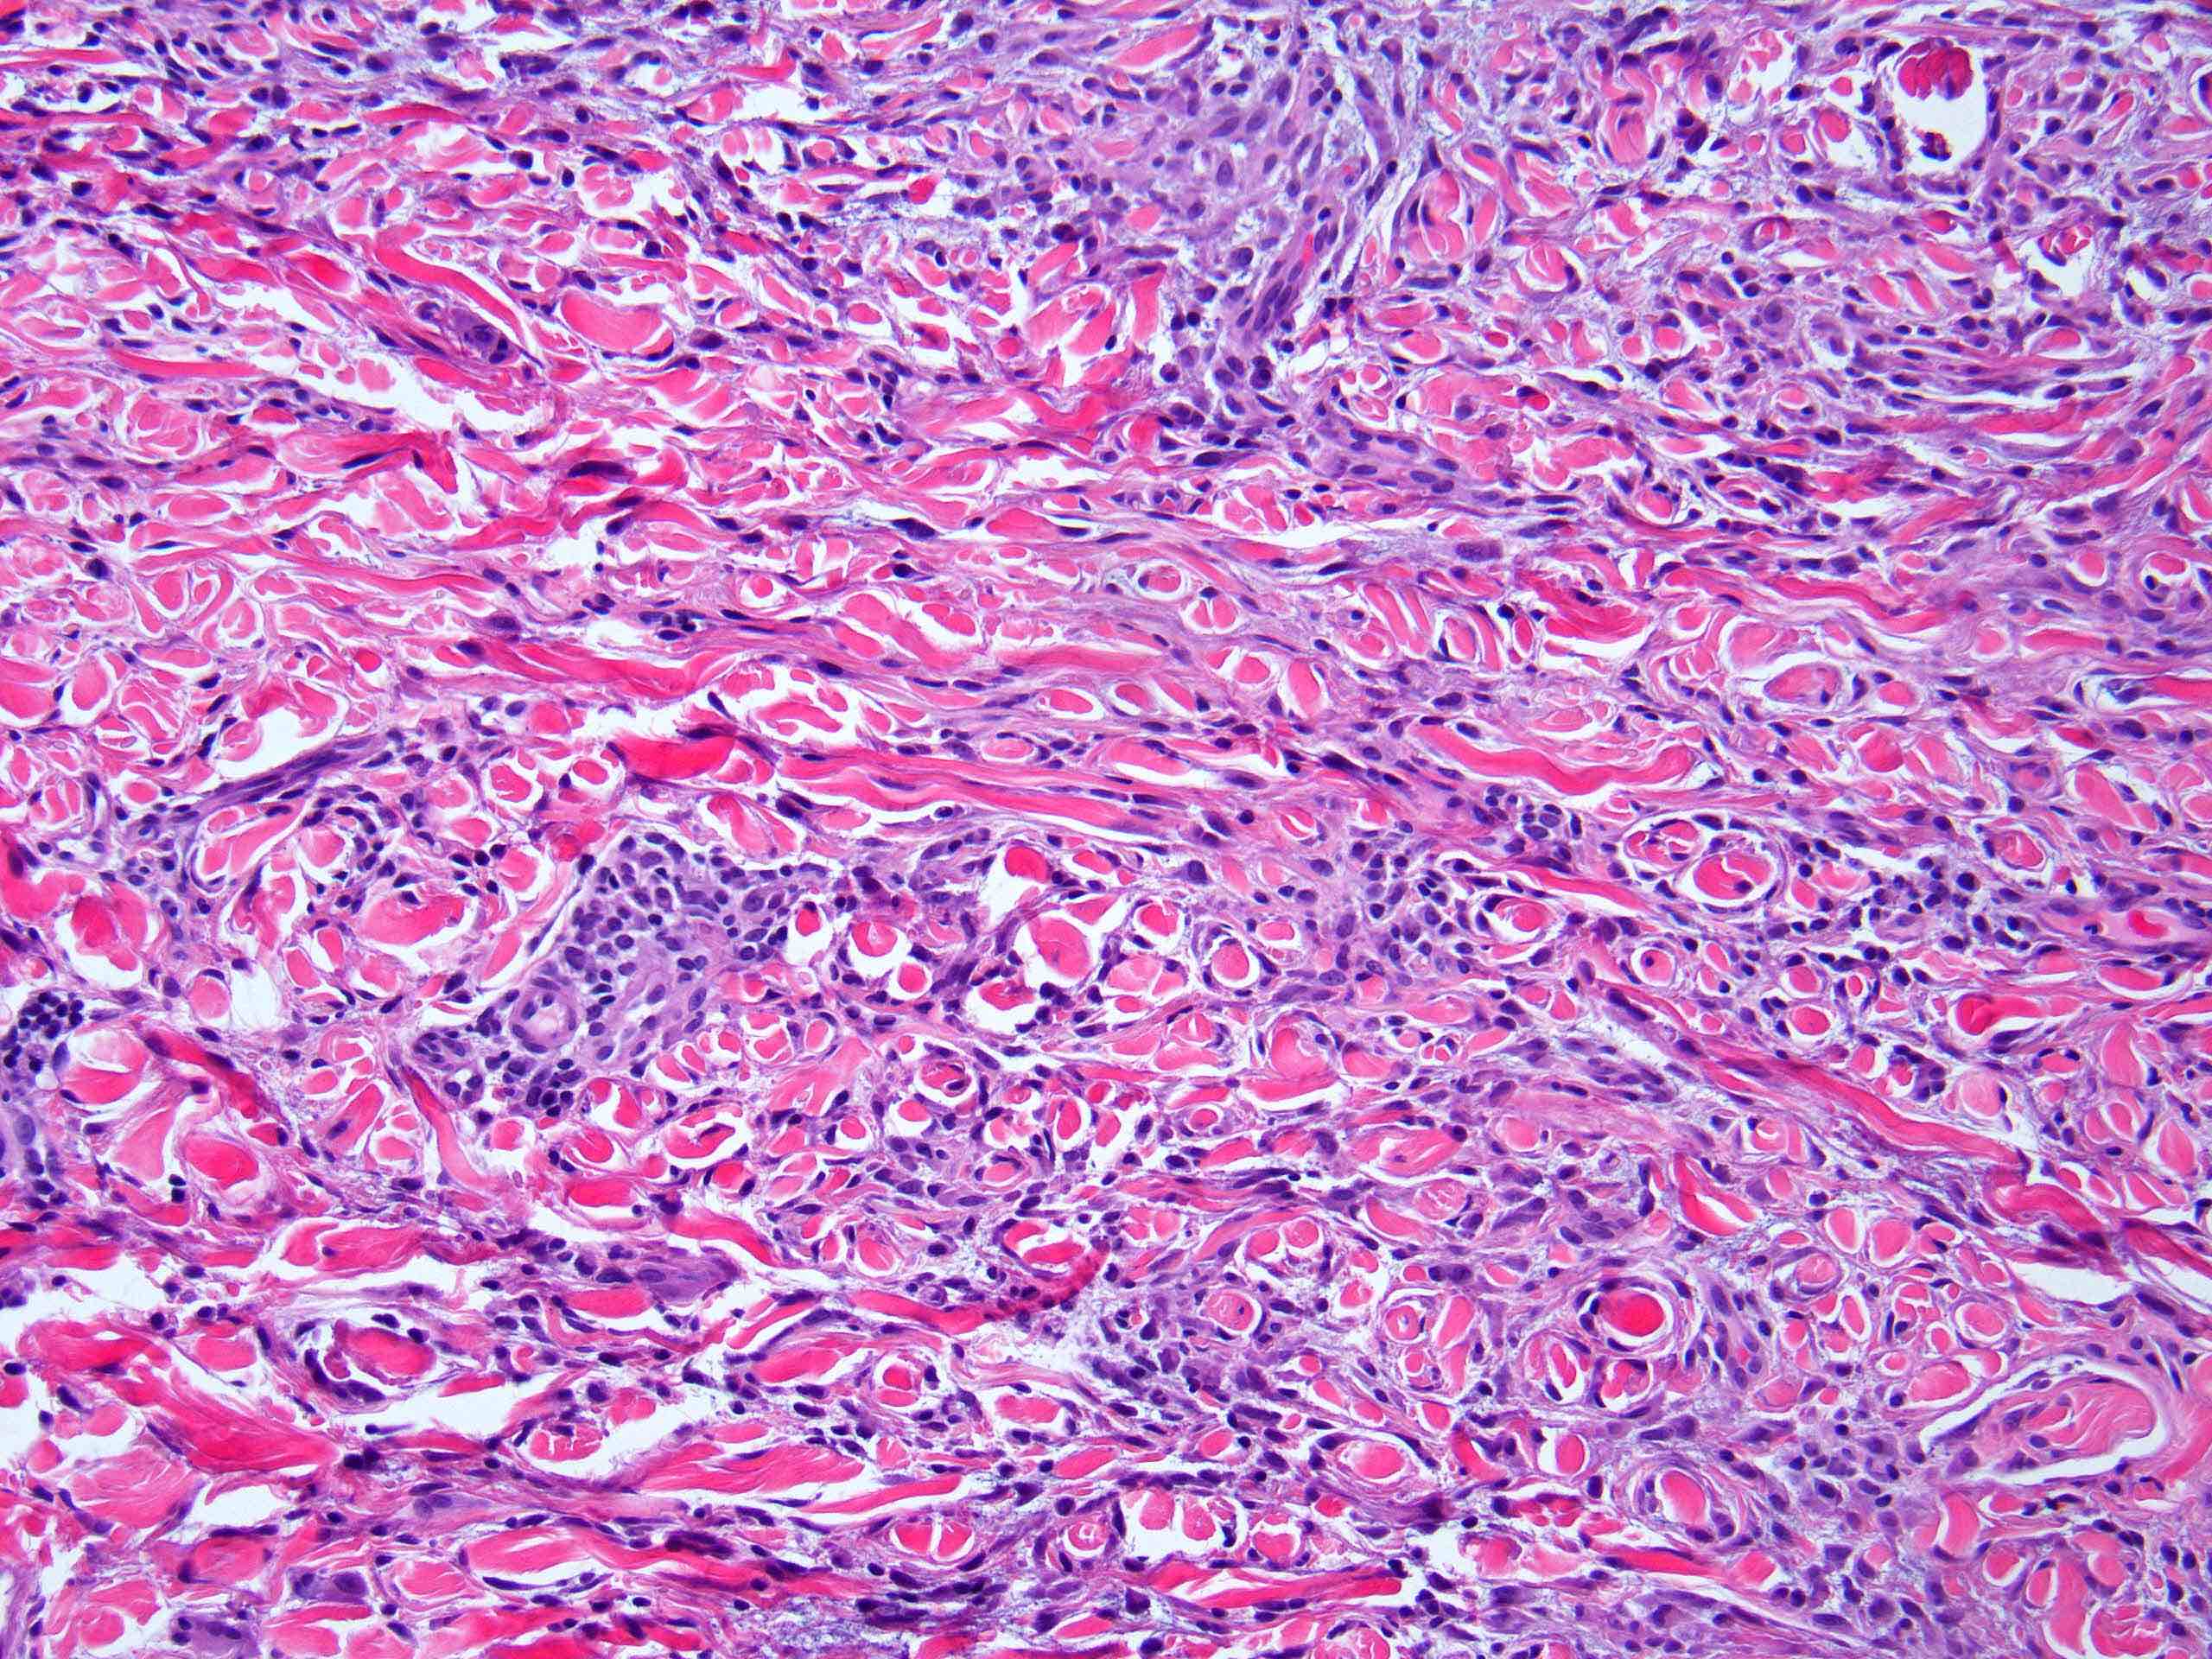 Interstitial histiocytic infiltrate